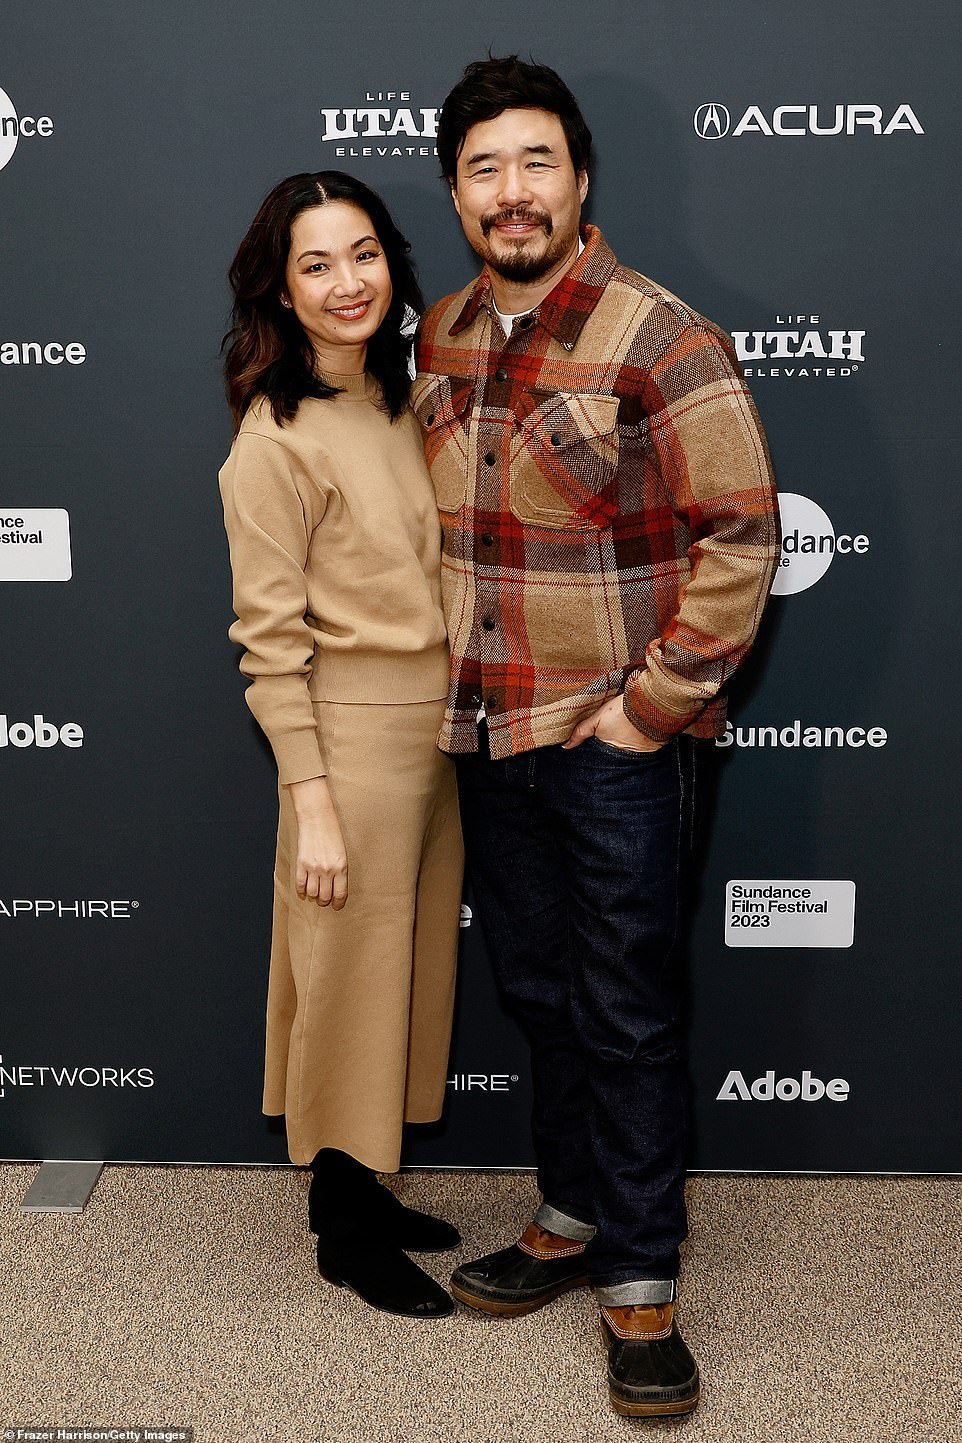 Randall, who wore a plaid shirt and duck boots, was joined by his wife of 13 years, Candy Coated Christmas actress Jae Suh Park.